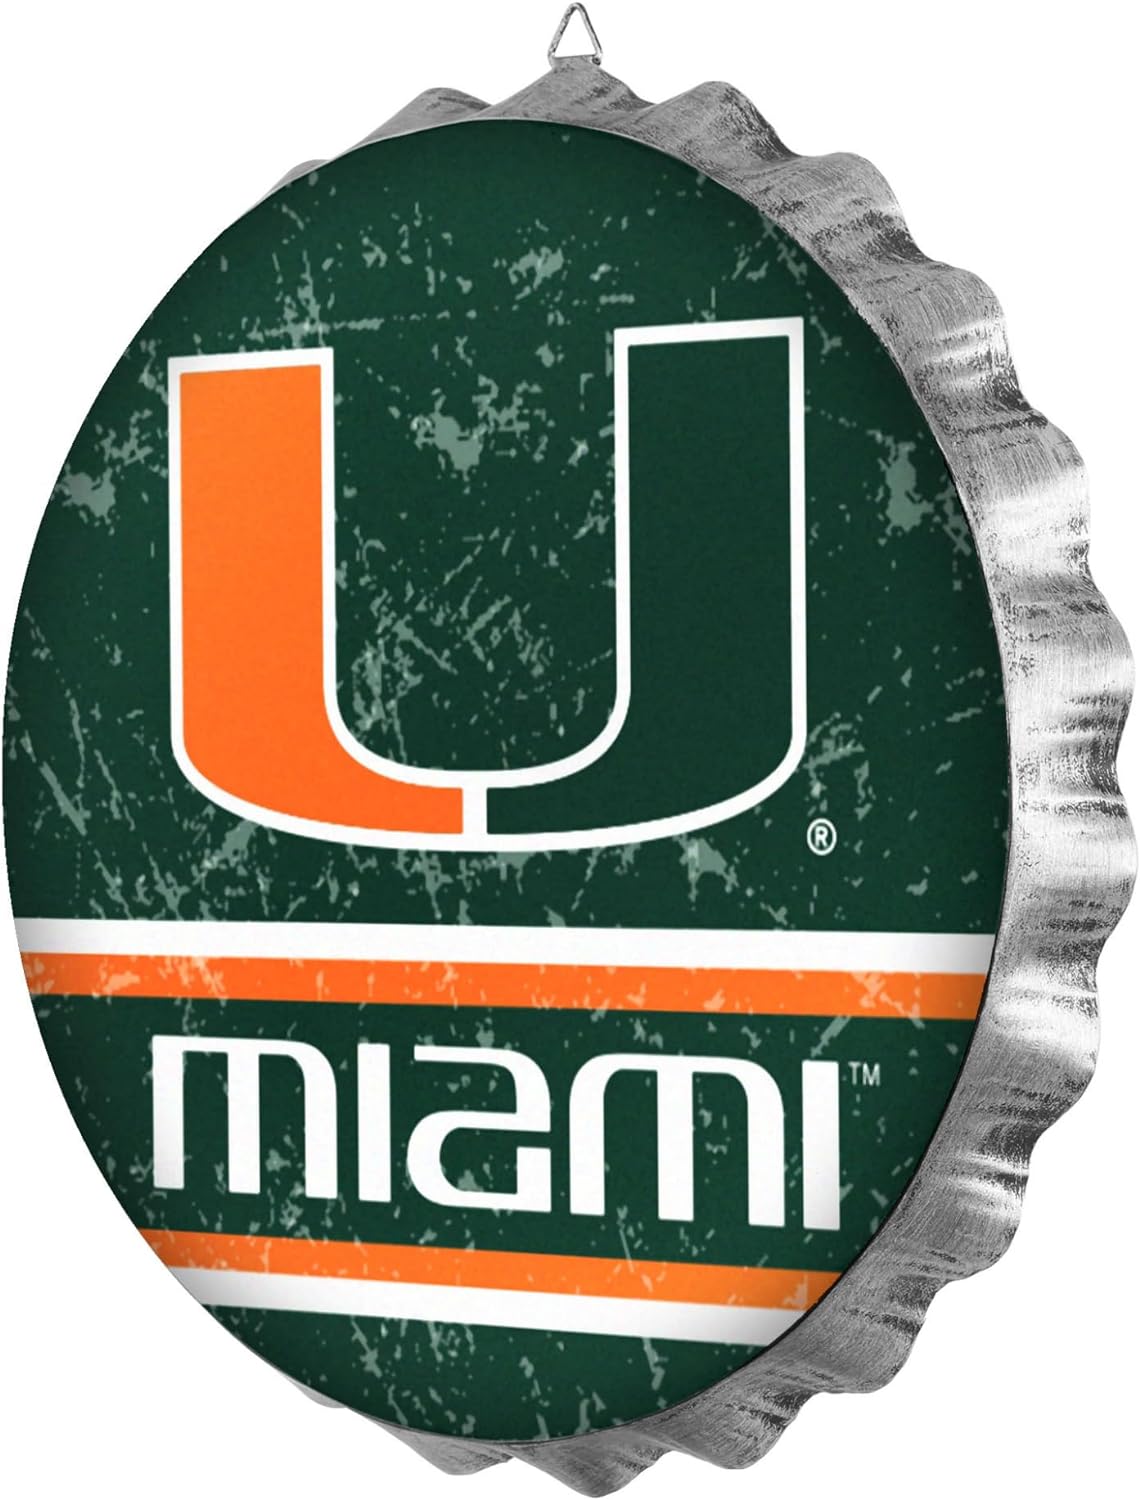 Miami Hurricanes 13” Jumbo Metal Distressed Bottle Cap Wall Sign – Limited Edition FOCO Hurricanes Sign – Represent the NCAA, ACC and Show Your Team Spirit with Officially Licensed MiamiCollege Football Fan Gear